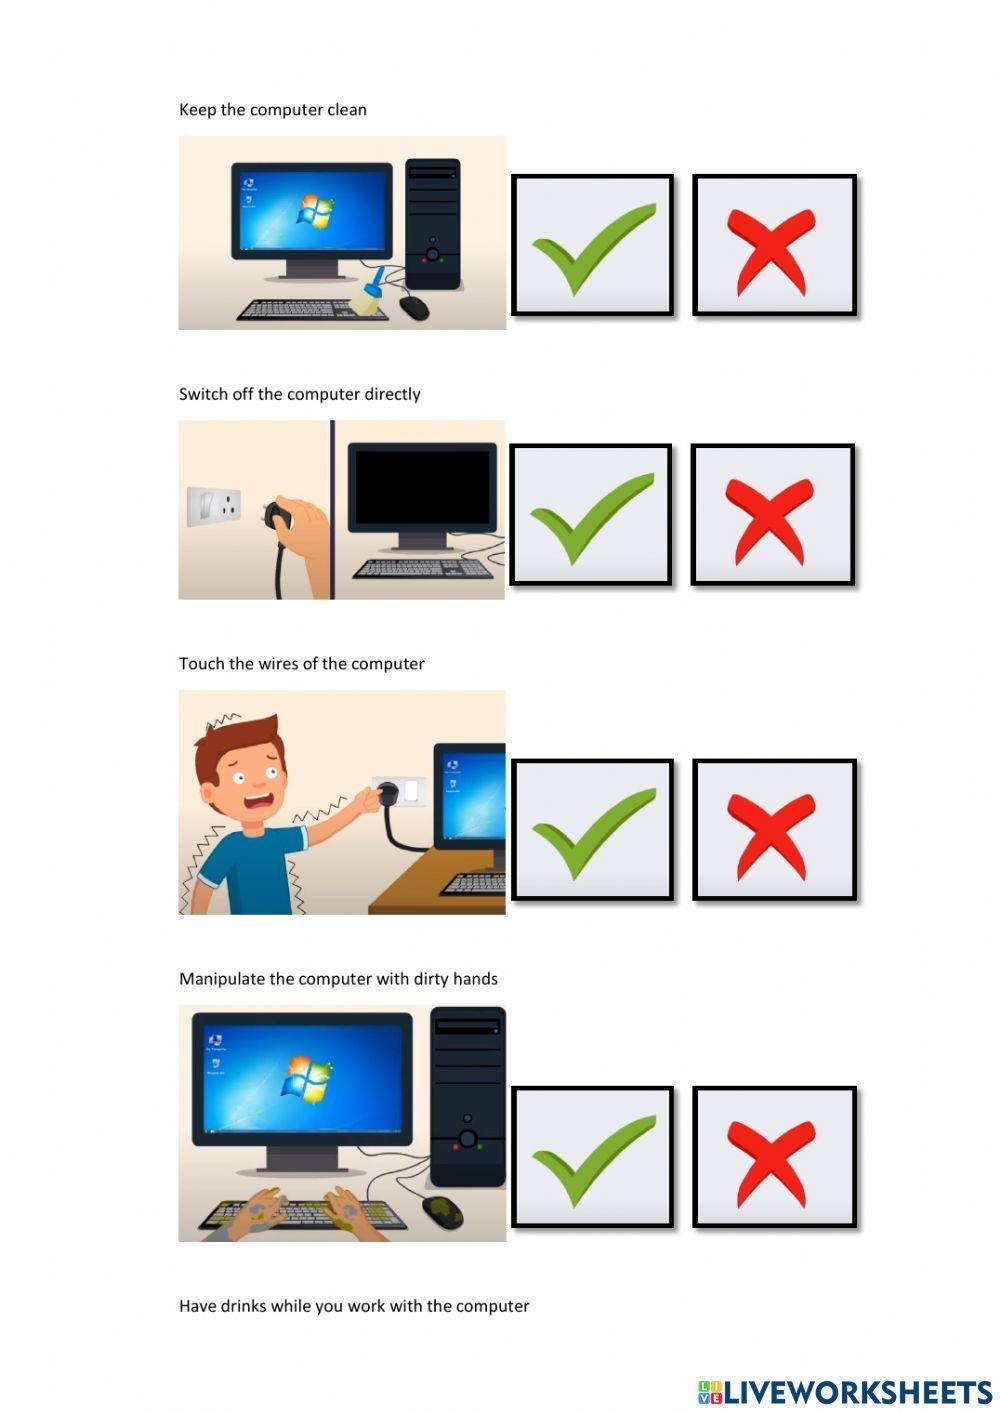 Do's and Dont's o using a computer